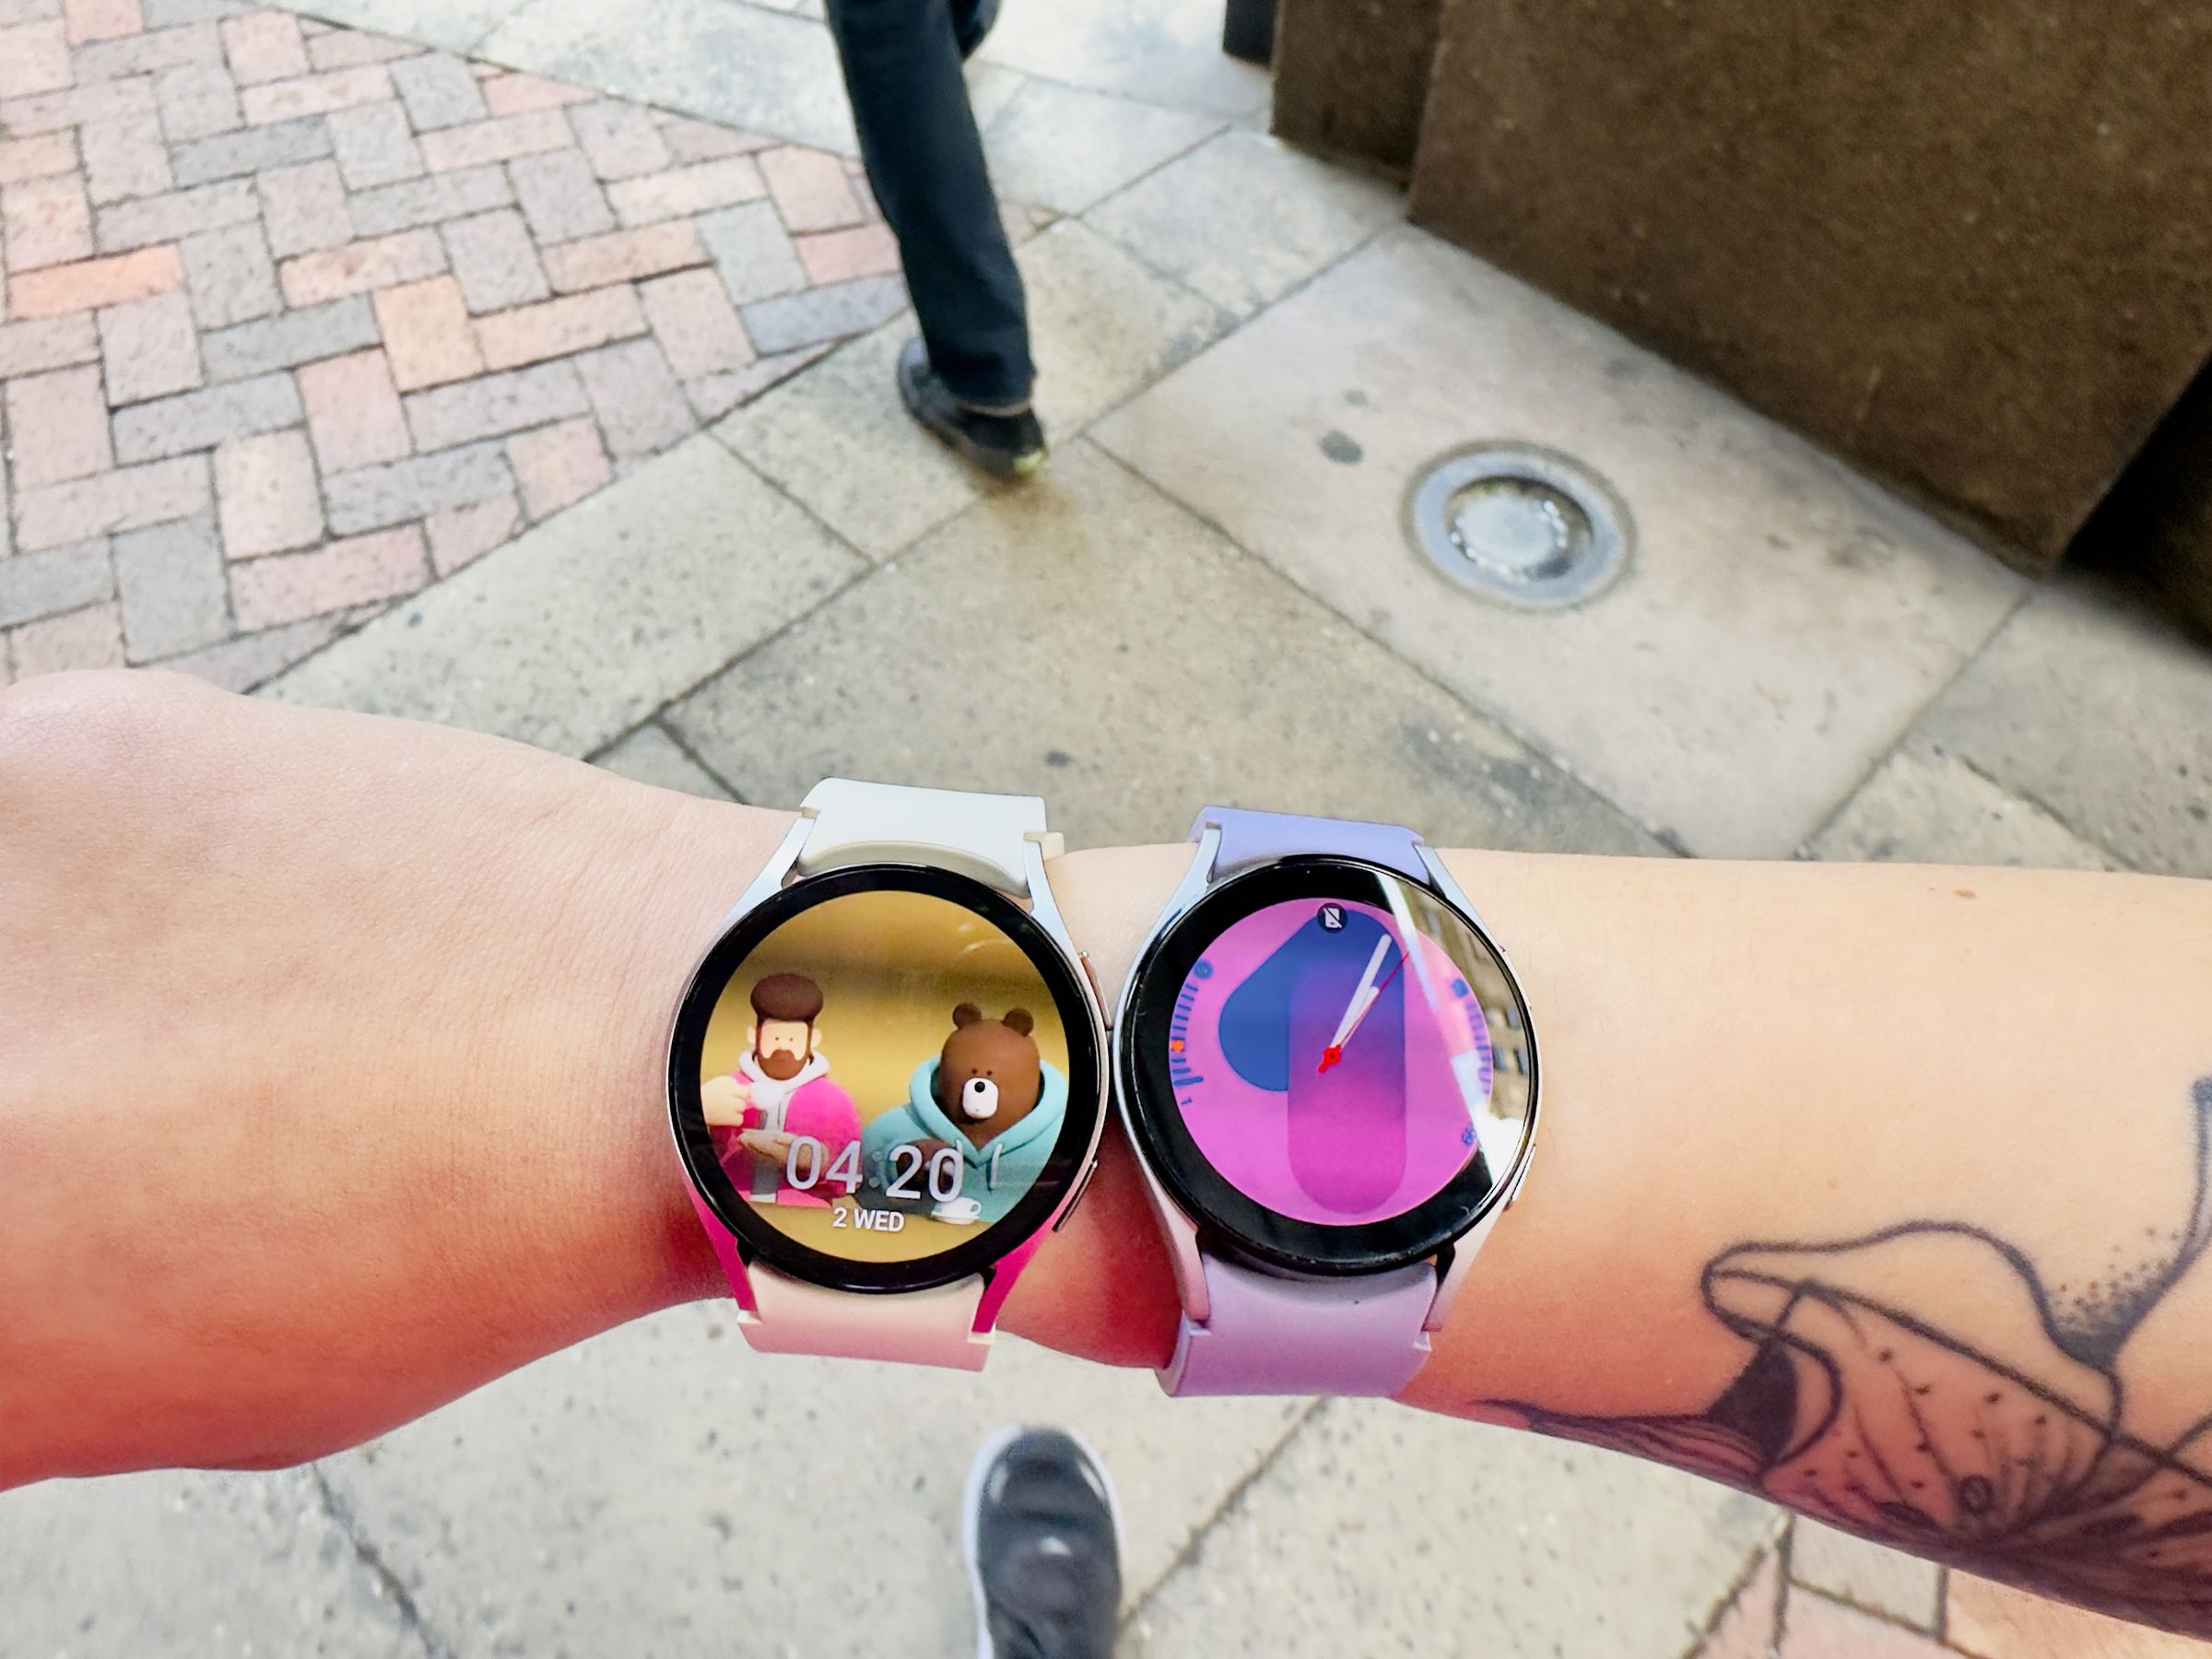 Galaxy Watch 6 (40mm) next to the Galaxy Watch 5, where the former looks bigger despite being the same size